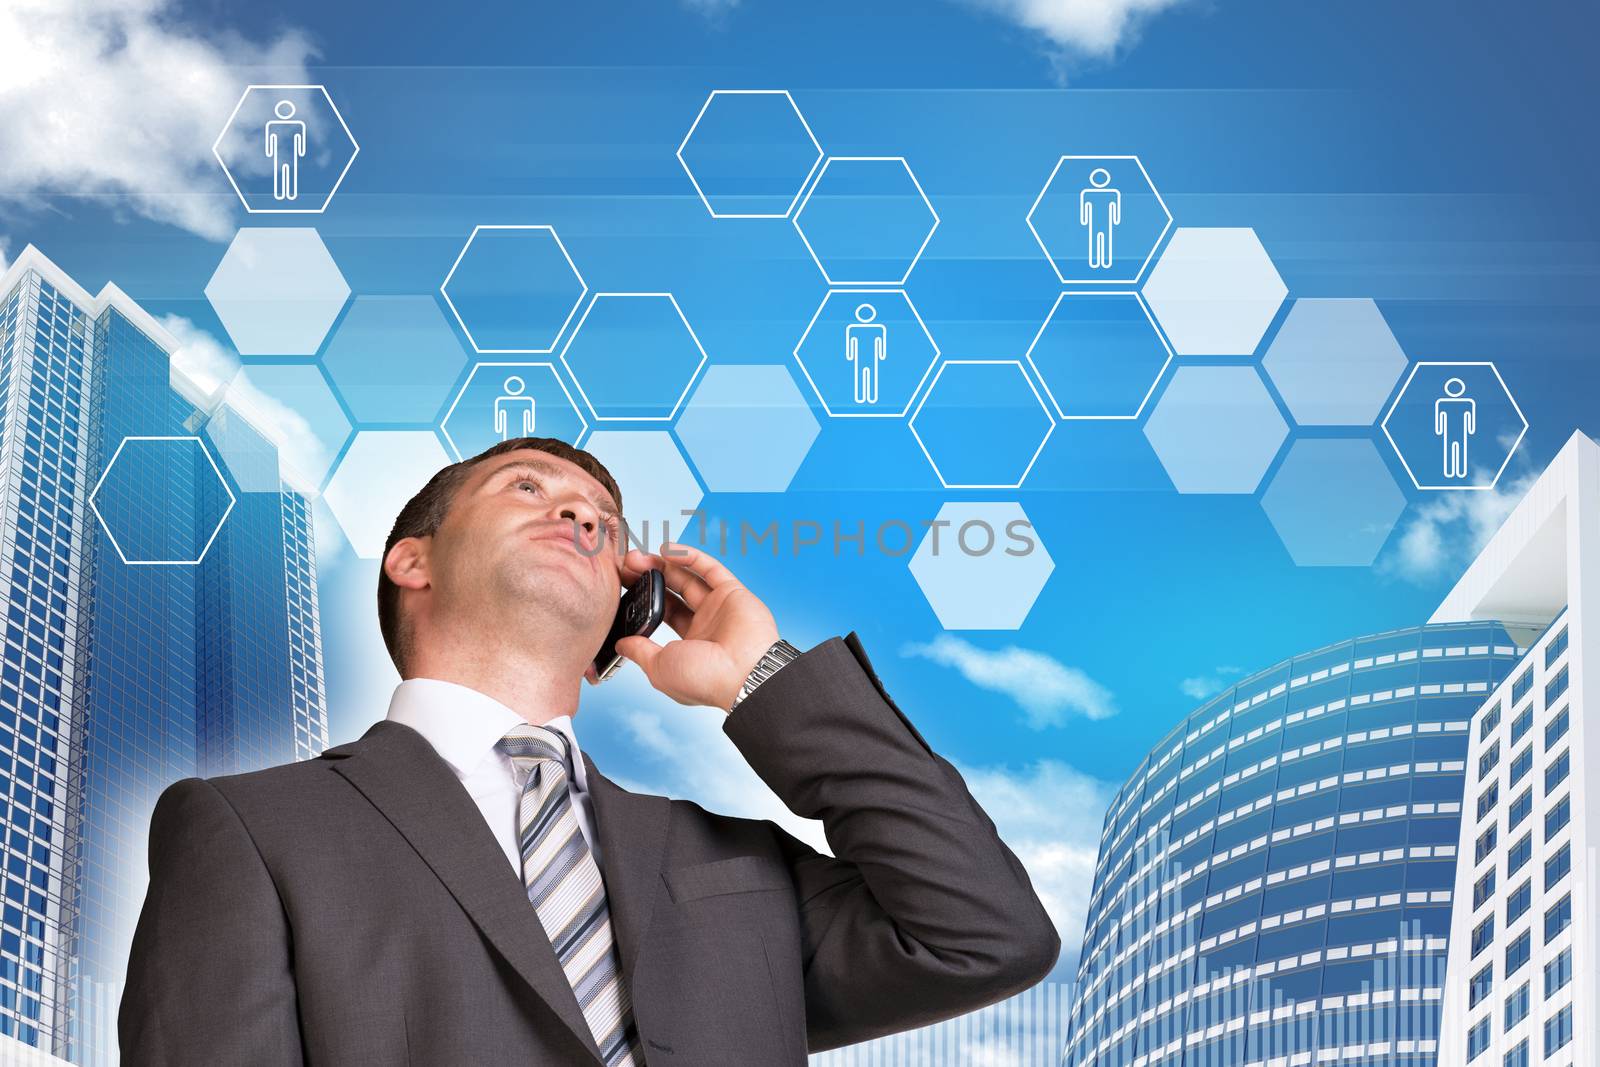 Businessman talking on the phone. Skyscrapers, sky and hexagons with people icons in background